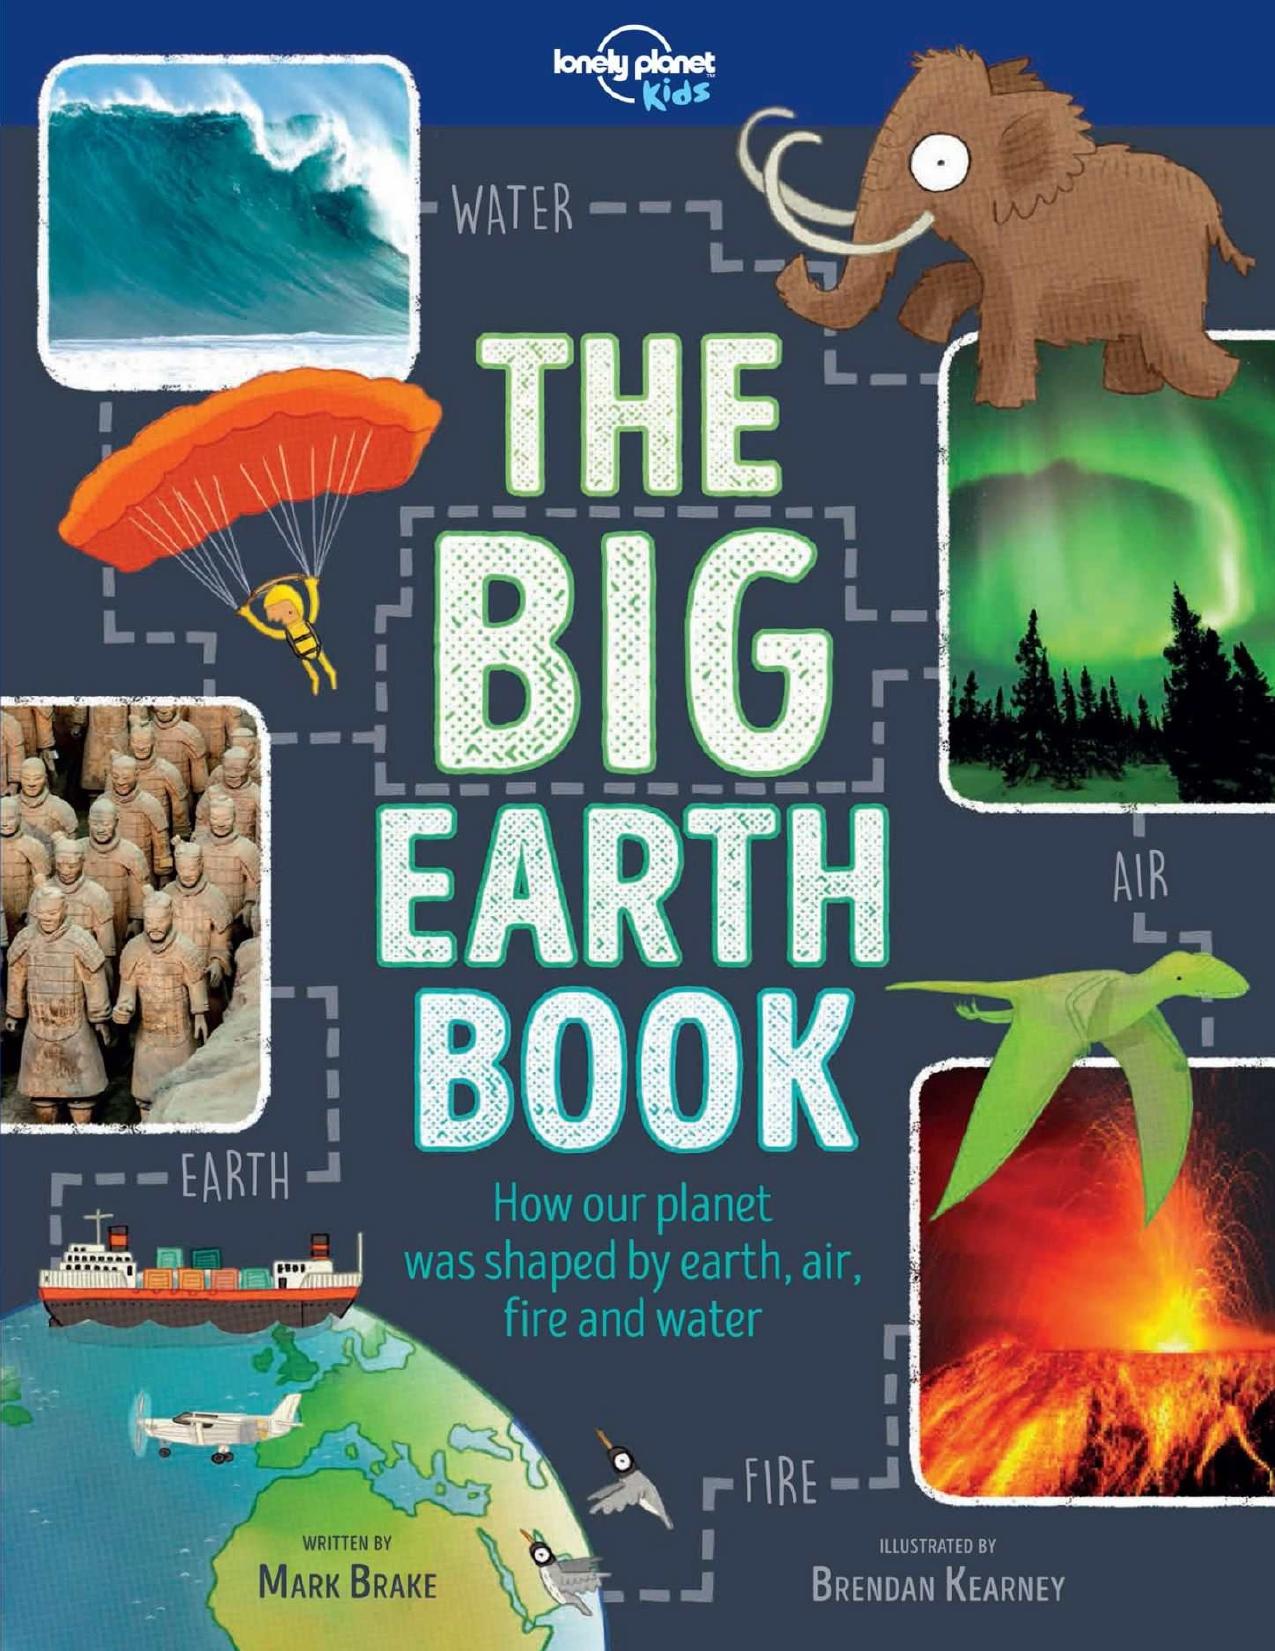 The Big Earth Book: How our planet was shaped by earth, air, fire and water - PDFDrive.com